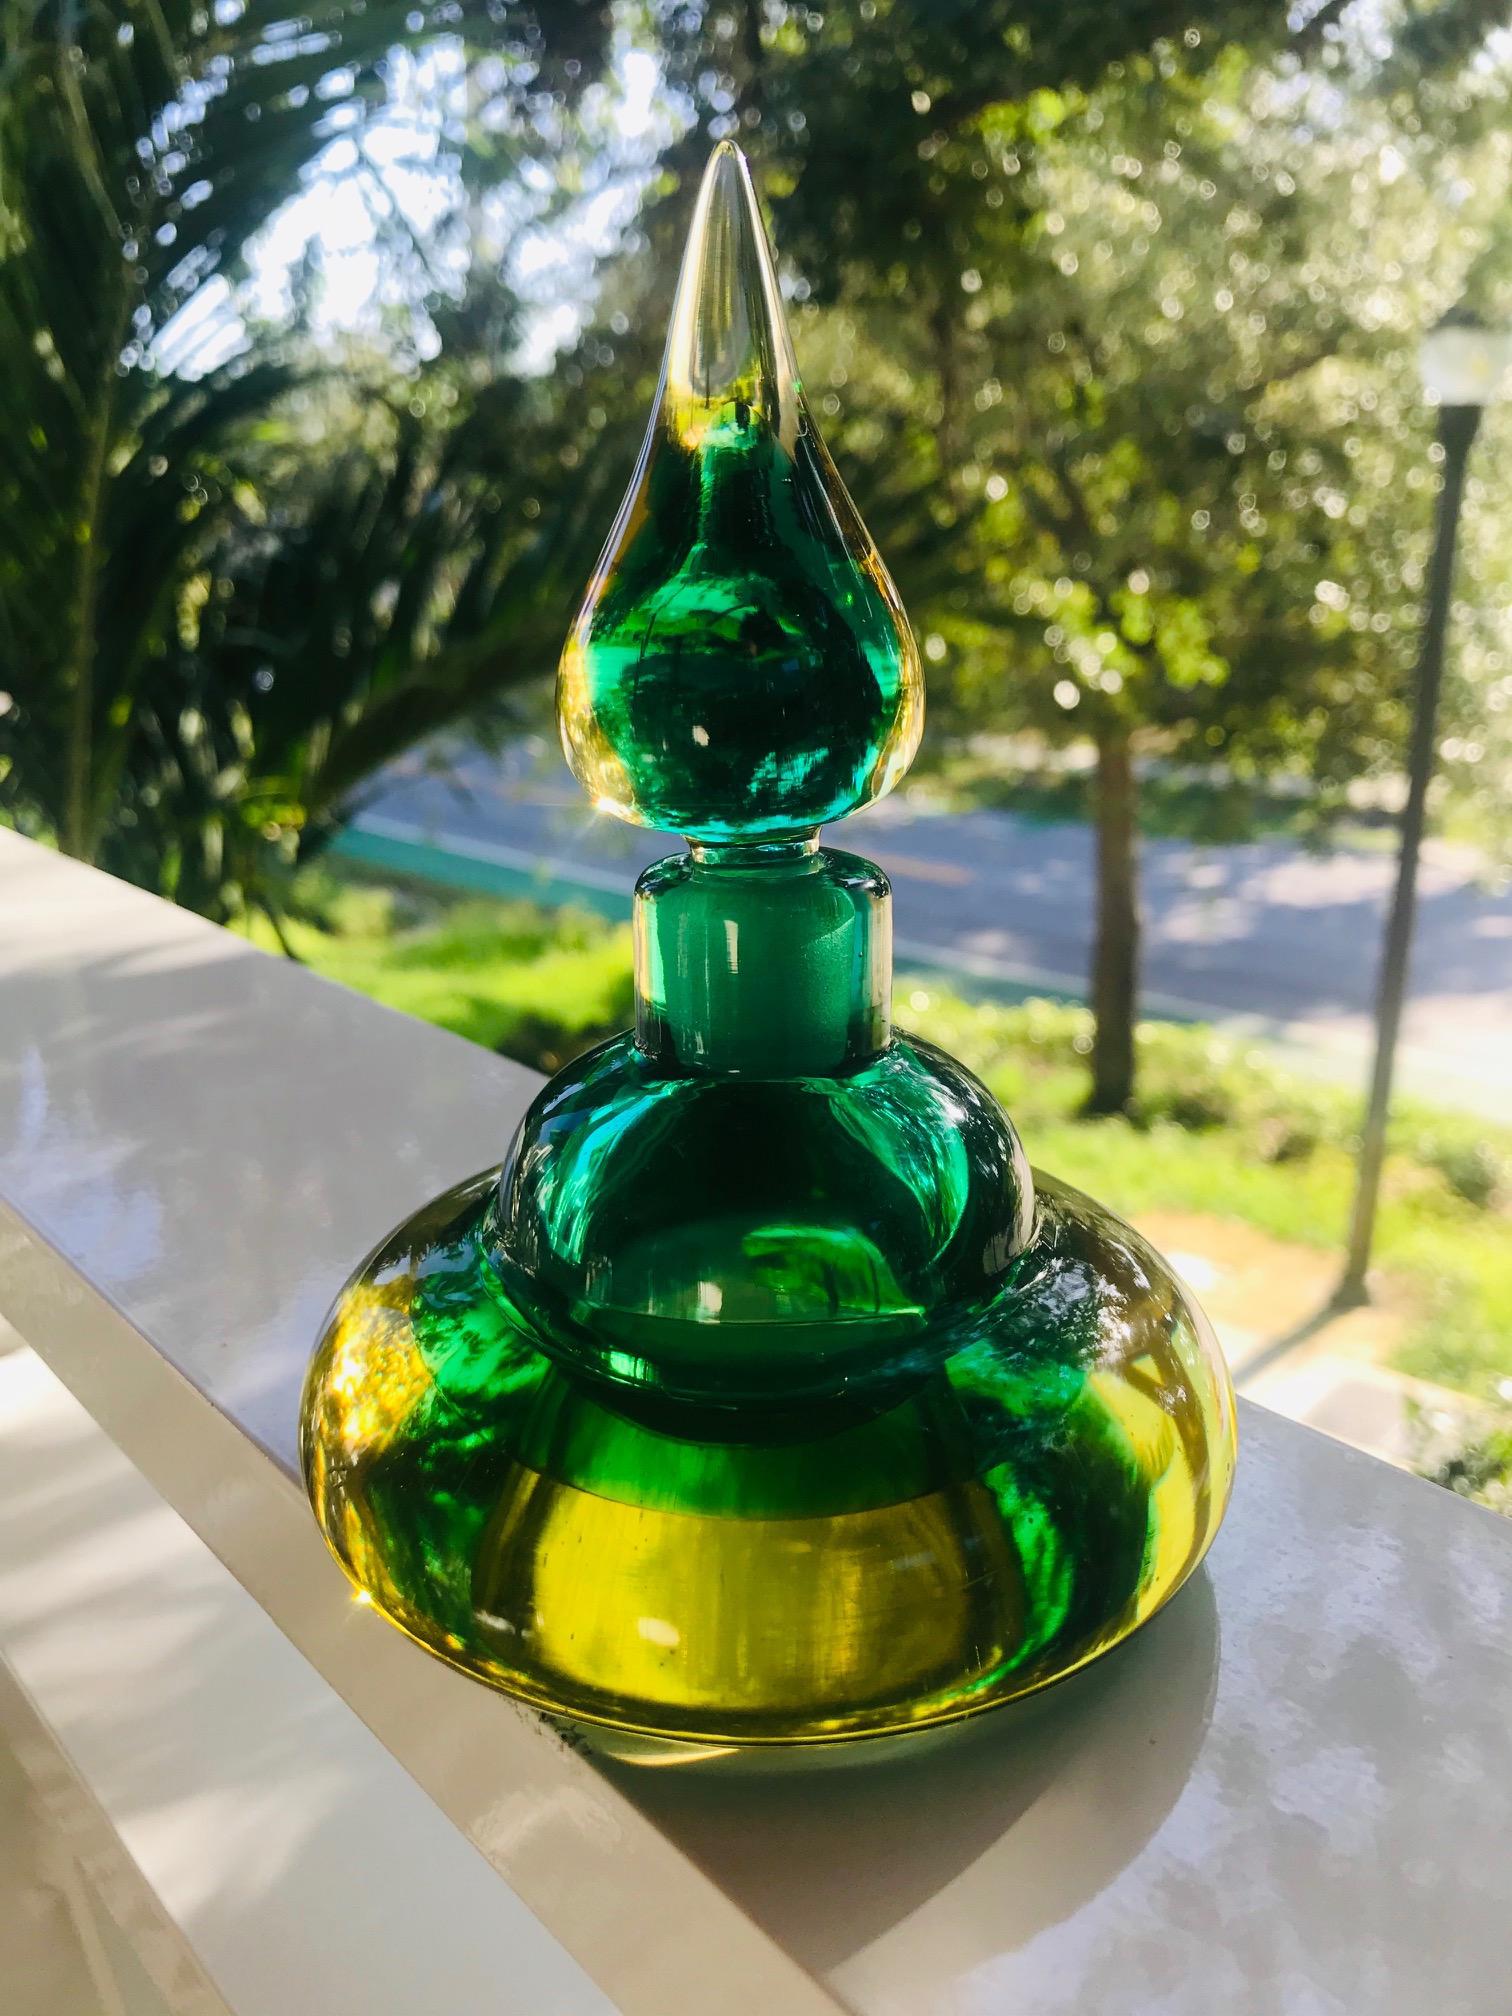 Mid-Century Modern decorative bottle or vintage perfume bottle by Flavio Poli for Seguso. Beautifully handcrafted in vibrant hues of emerald green and golden yellow. Hand blown with Sommerso technique featuring a stylized genie bottle design with a